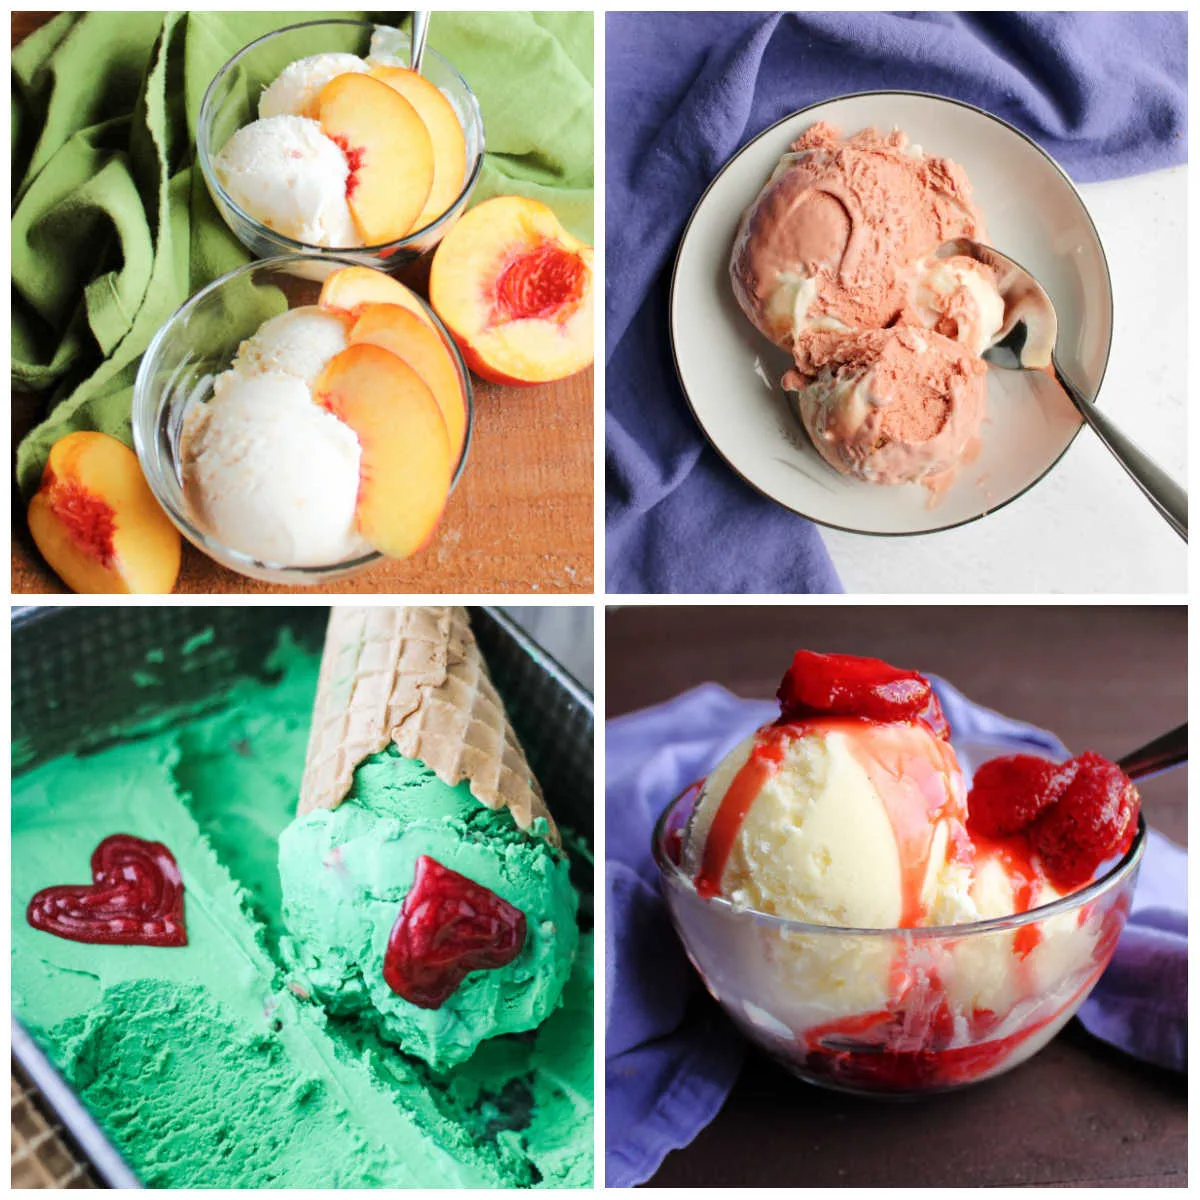 Collage of homemade ice cream images with peach ice cream, grinch ice cream, vanilla ice cream with strawberries and pink velvet ice cream.